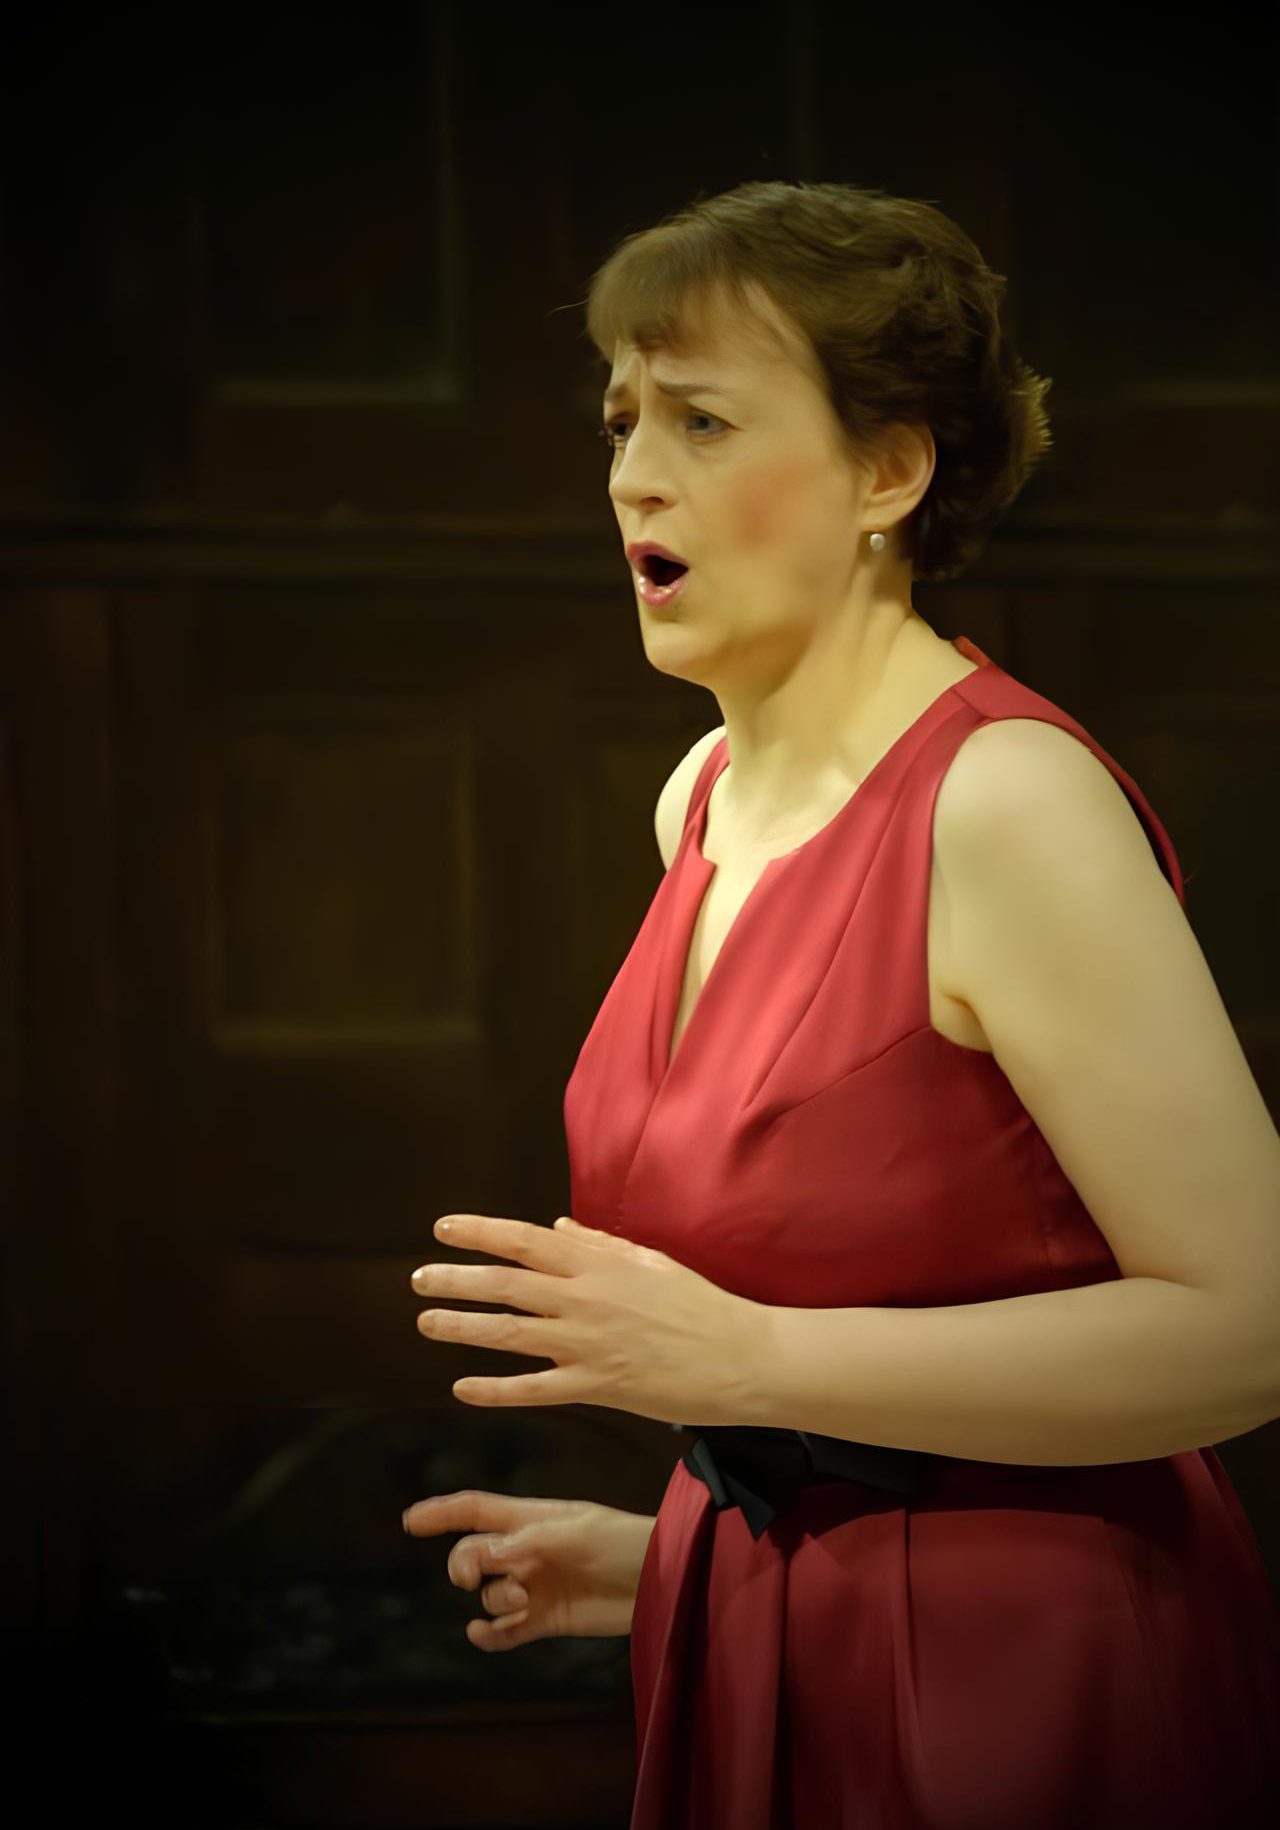 Alison singing at a classical performance